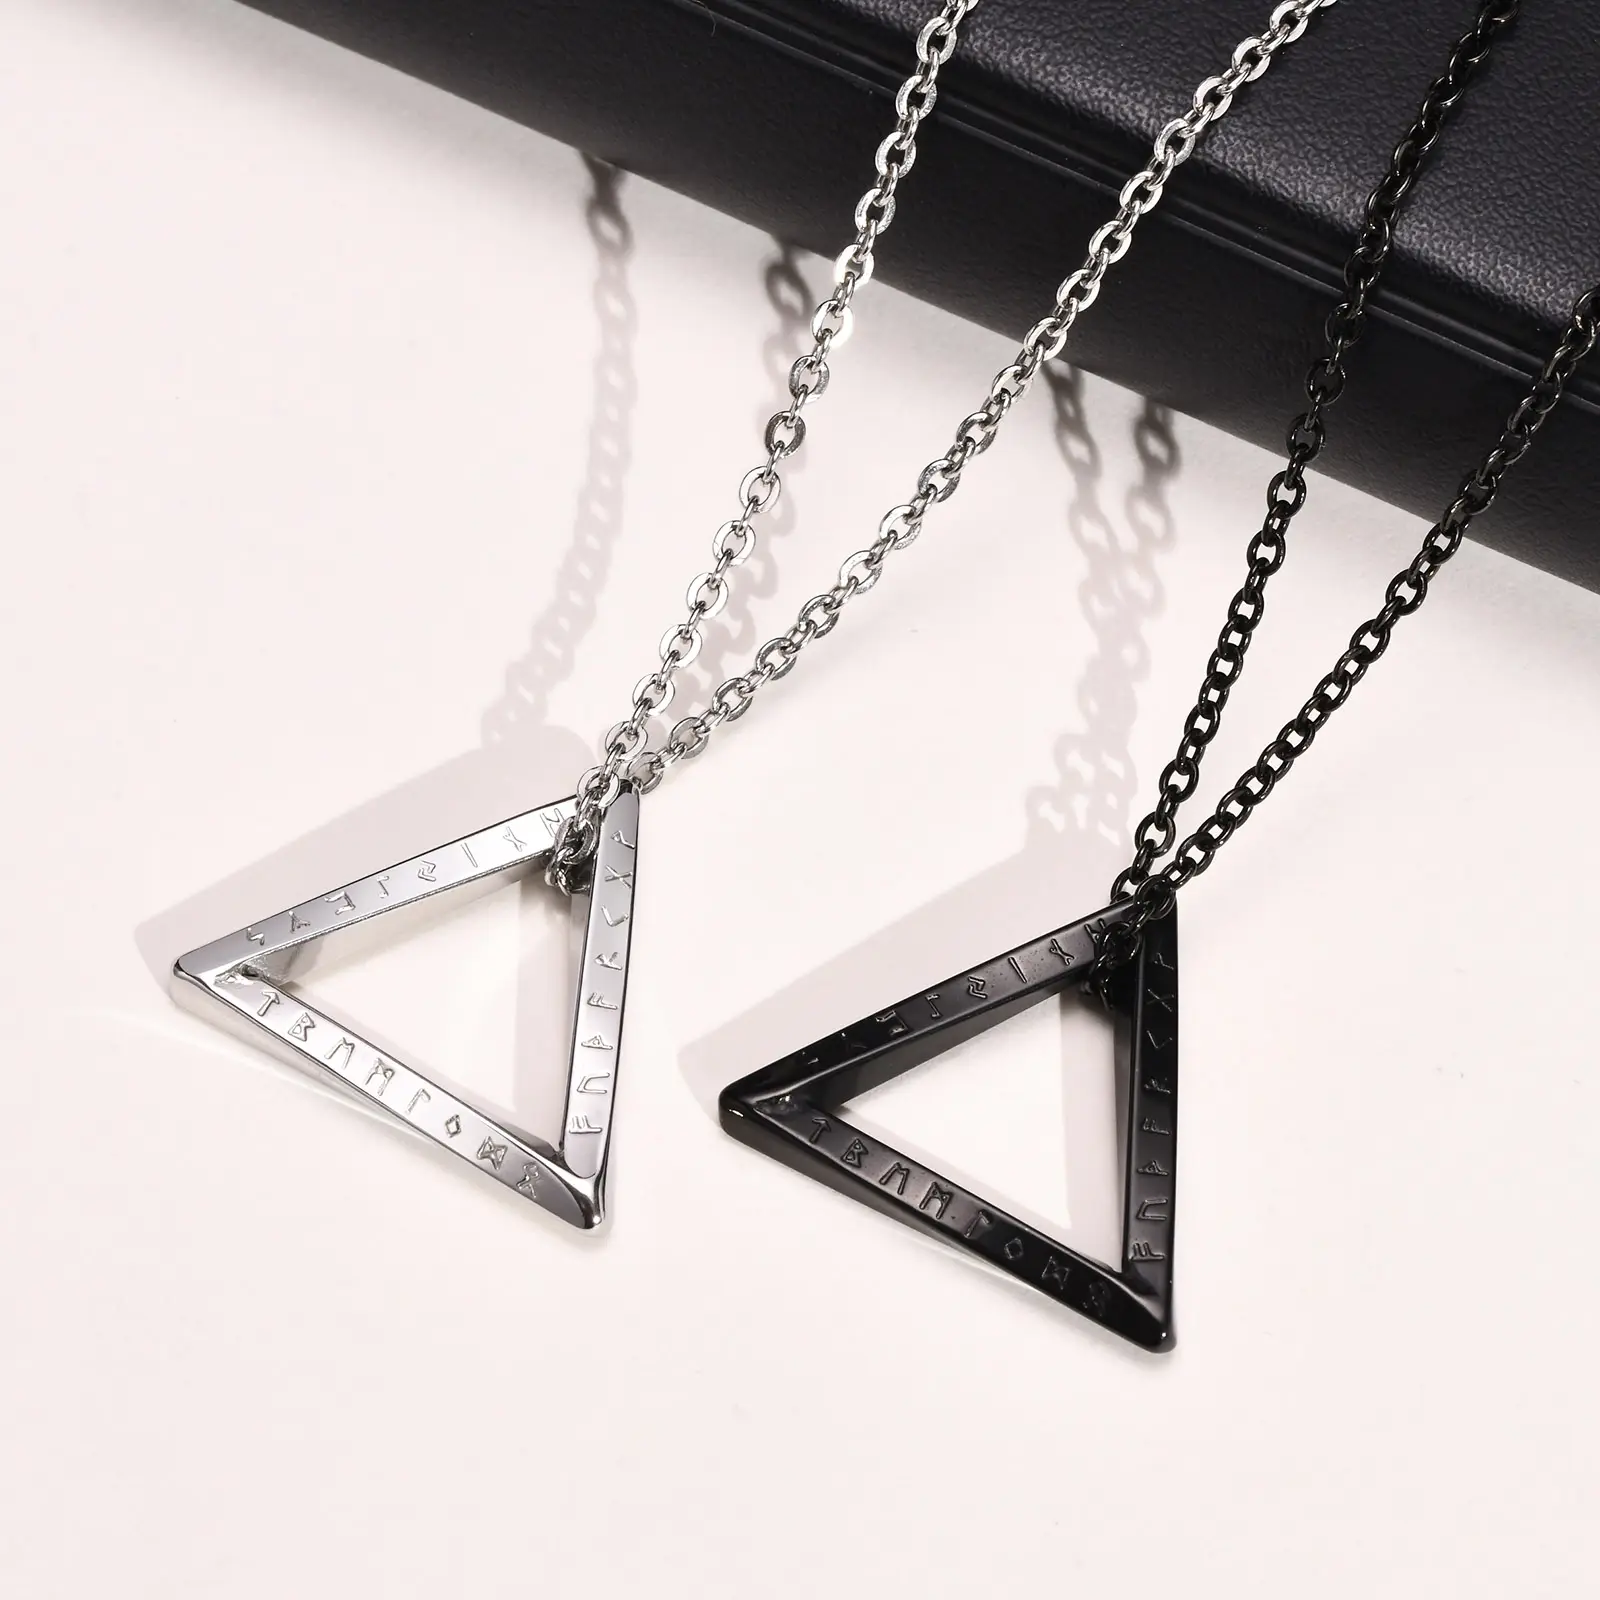 Stainless Steel Triangle Charm Pendant Necklace Chain Jewelry Fashion Men Custom Necklace